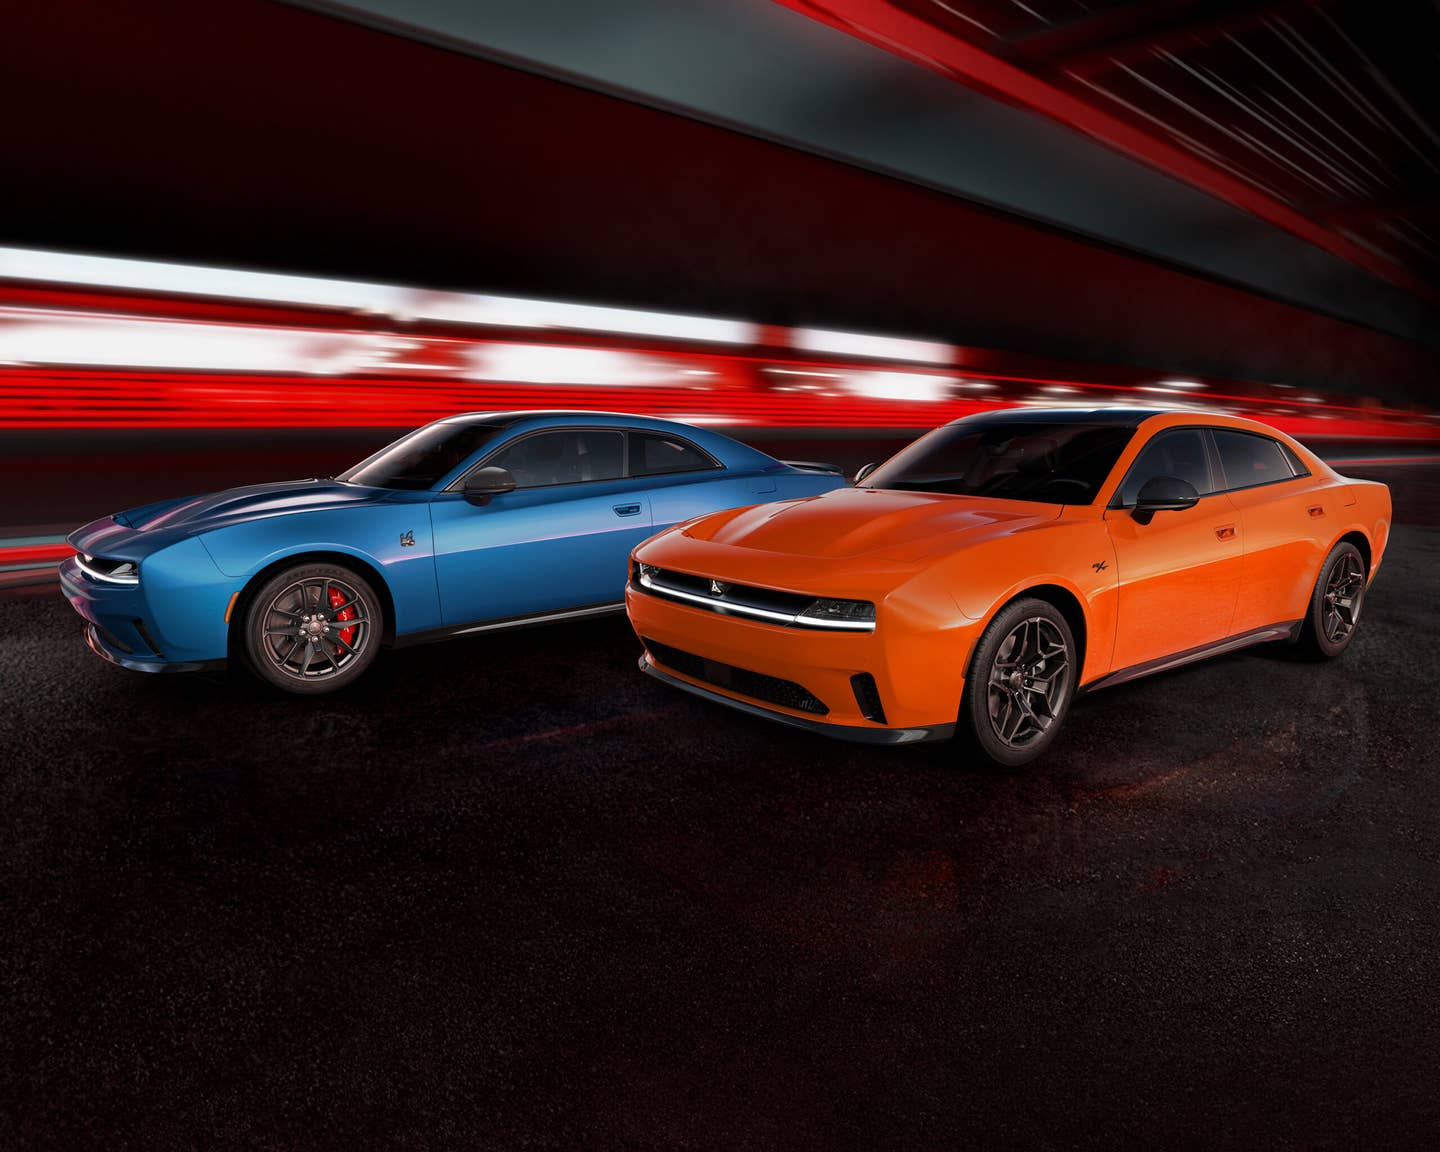 The Dodge Charger Daytona Scat Pack (shown in Bludicrous) and Dodge Charger Daytona R/T (shown in Peel Out) represent the first–ever all-electric vehicles from the Dodge brand.